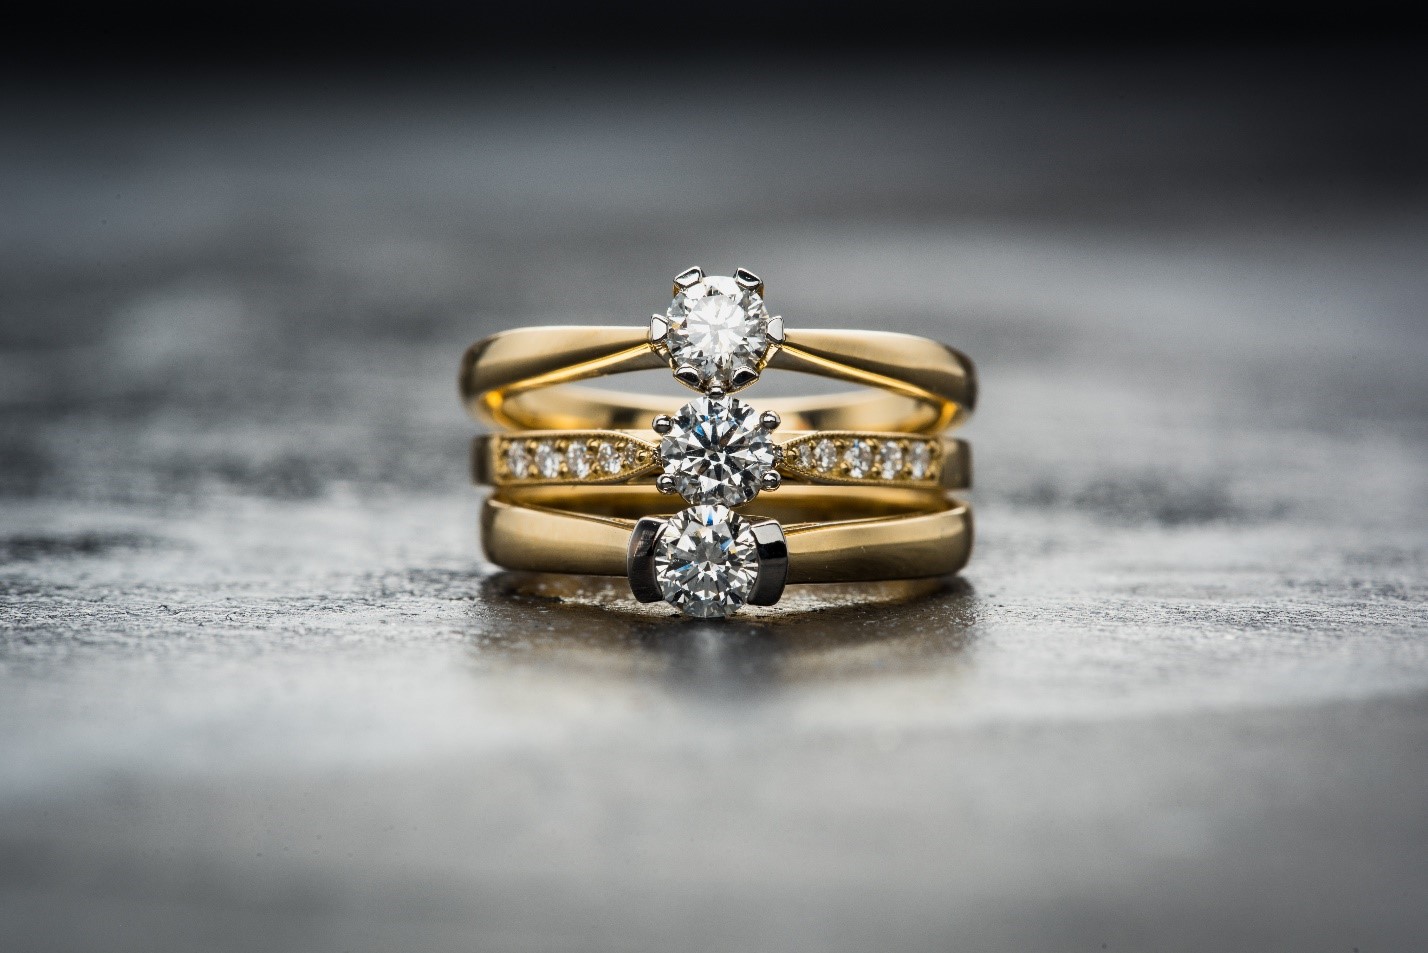 2020 engagement ring trend